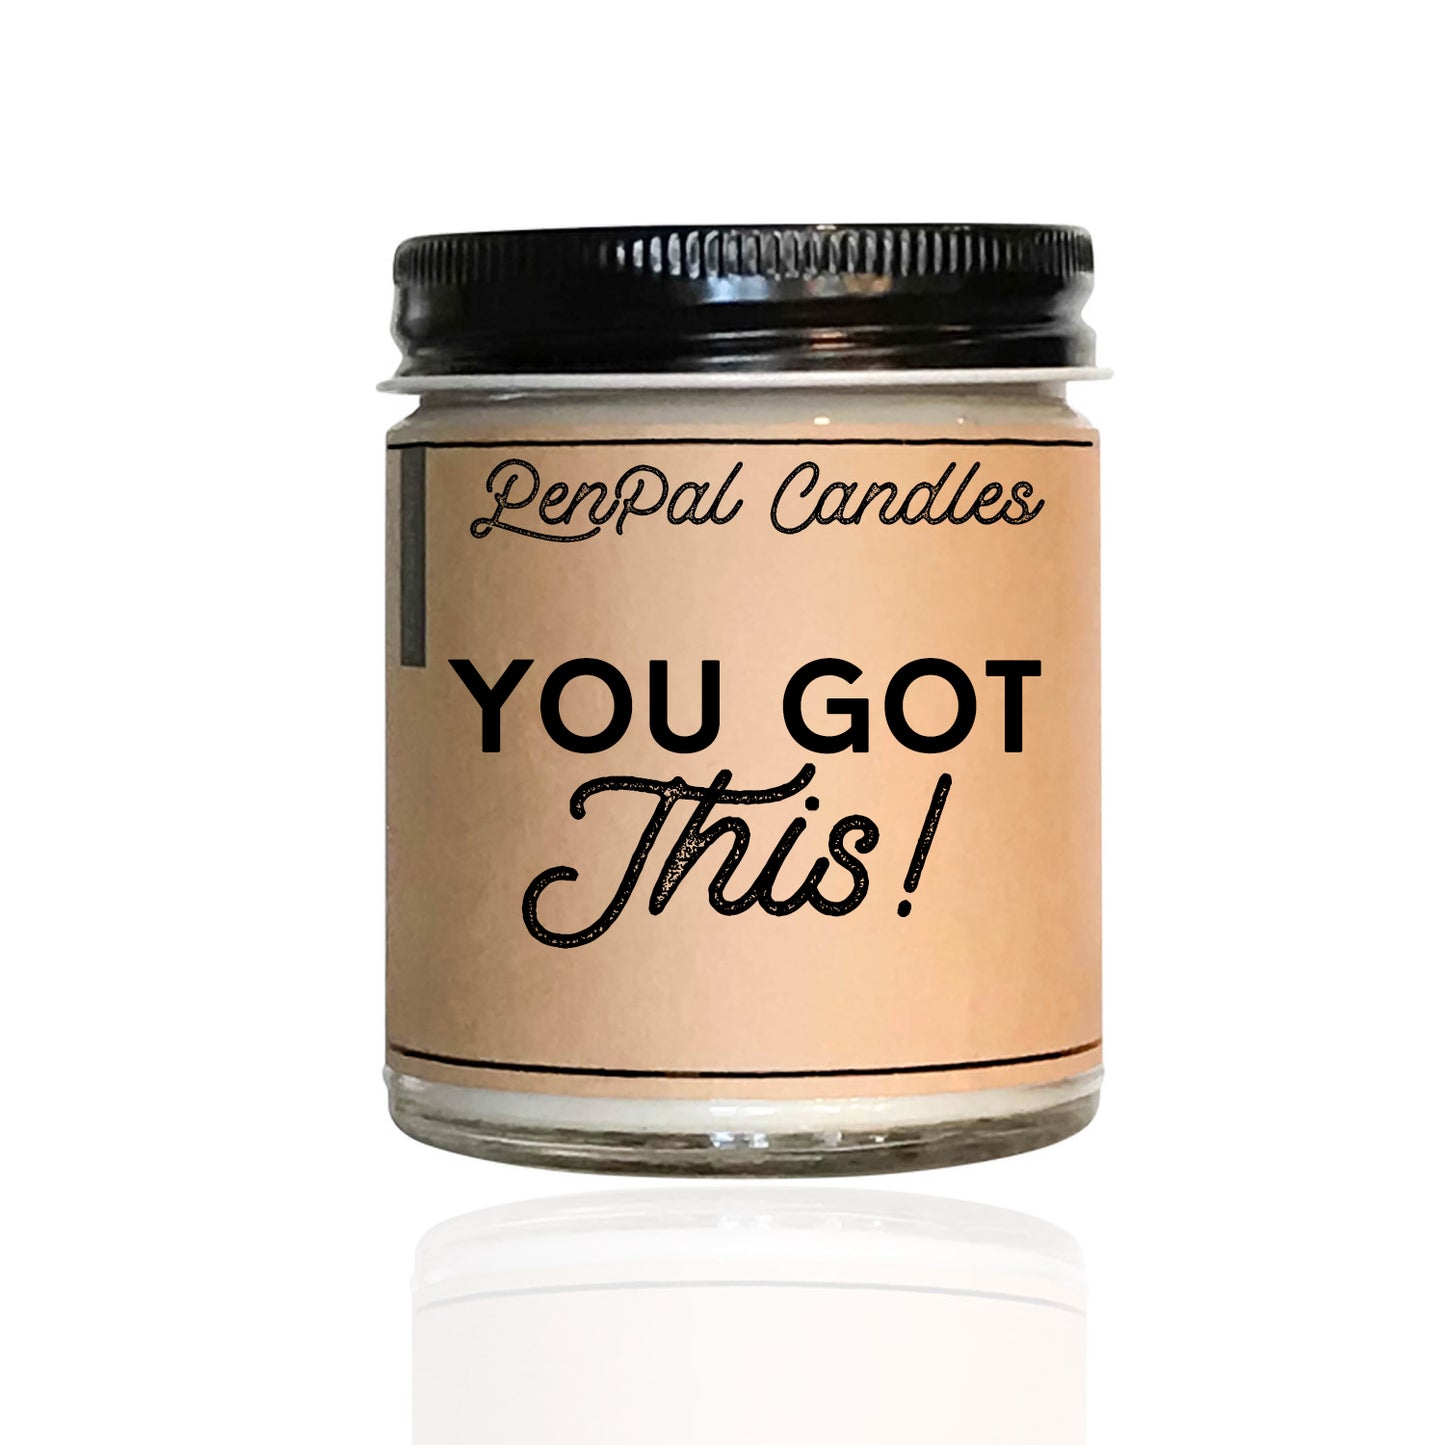 You got this! - scented candle - personalized gift